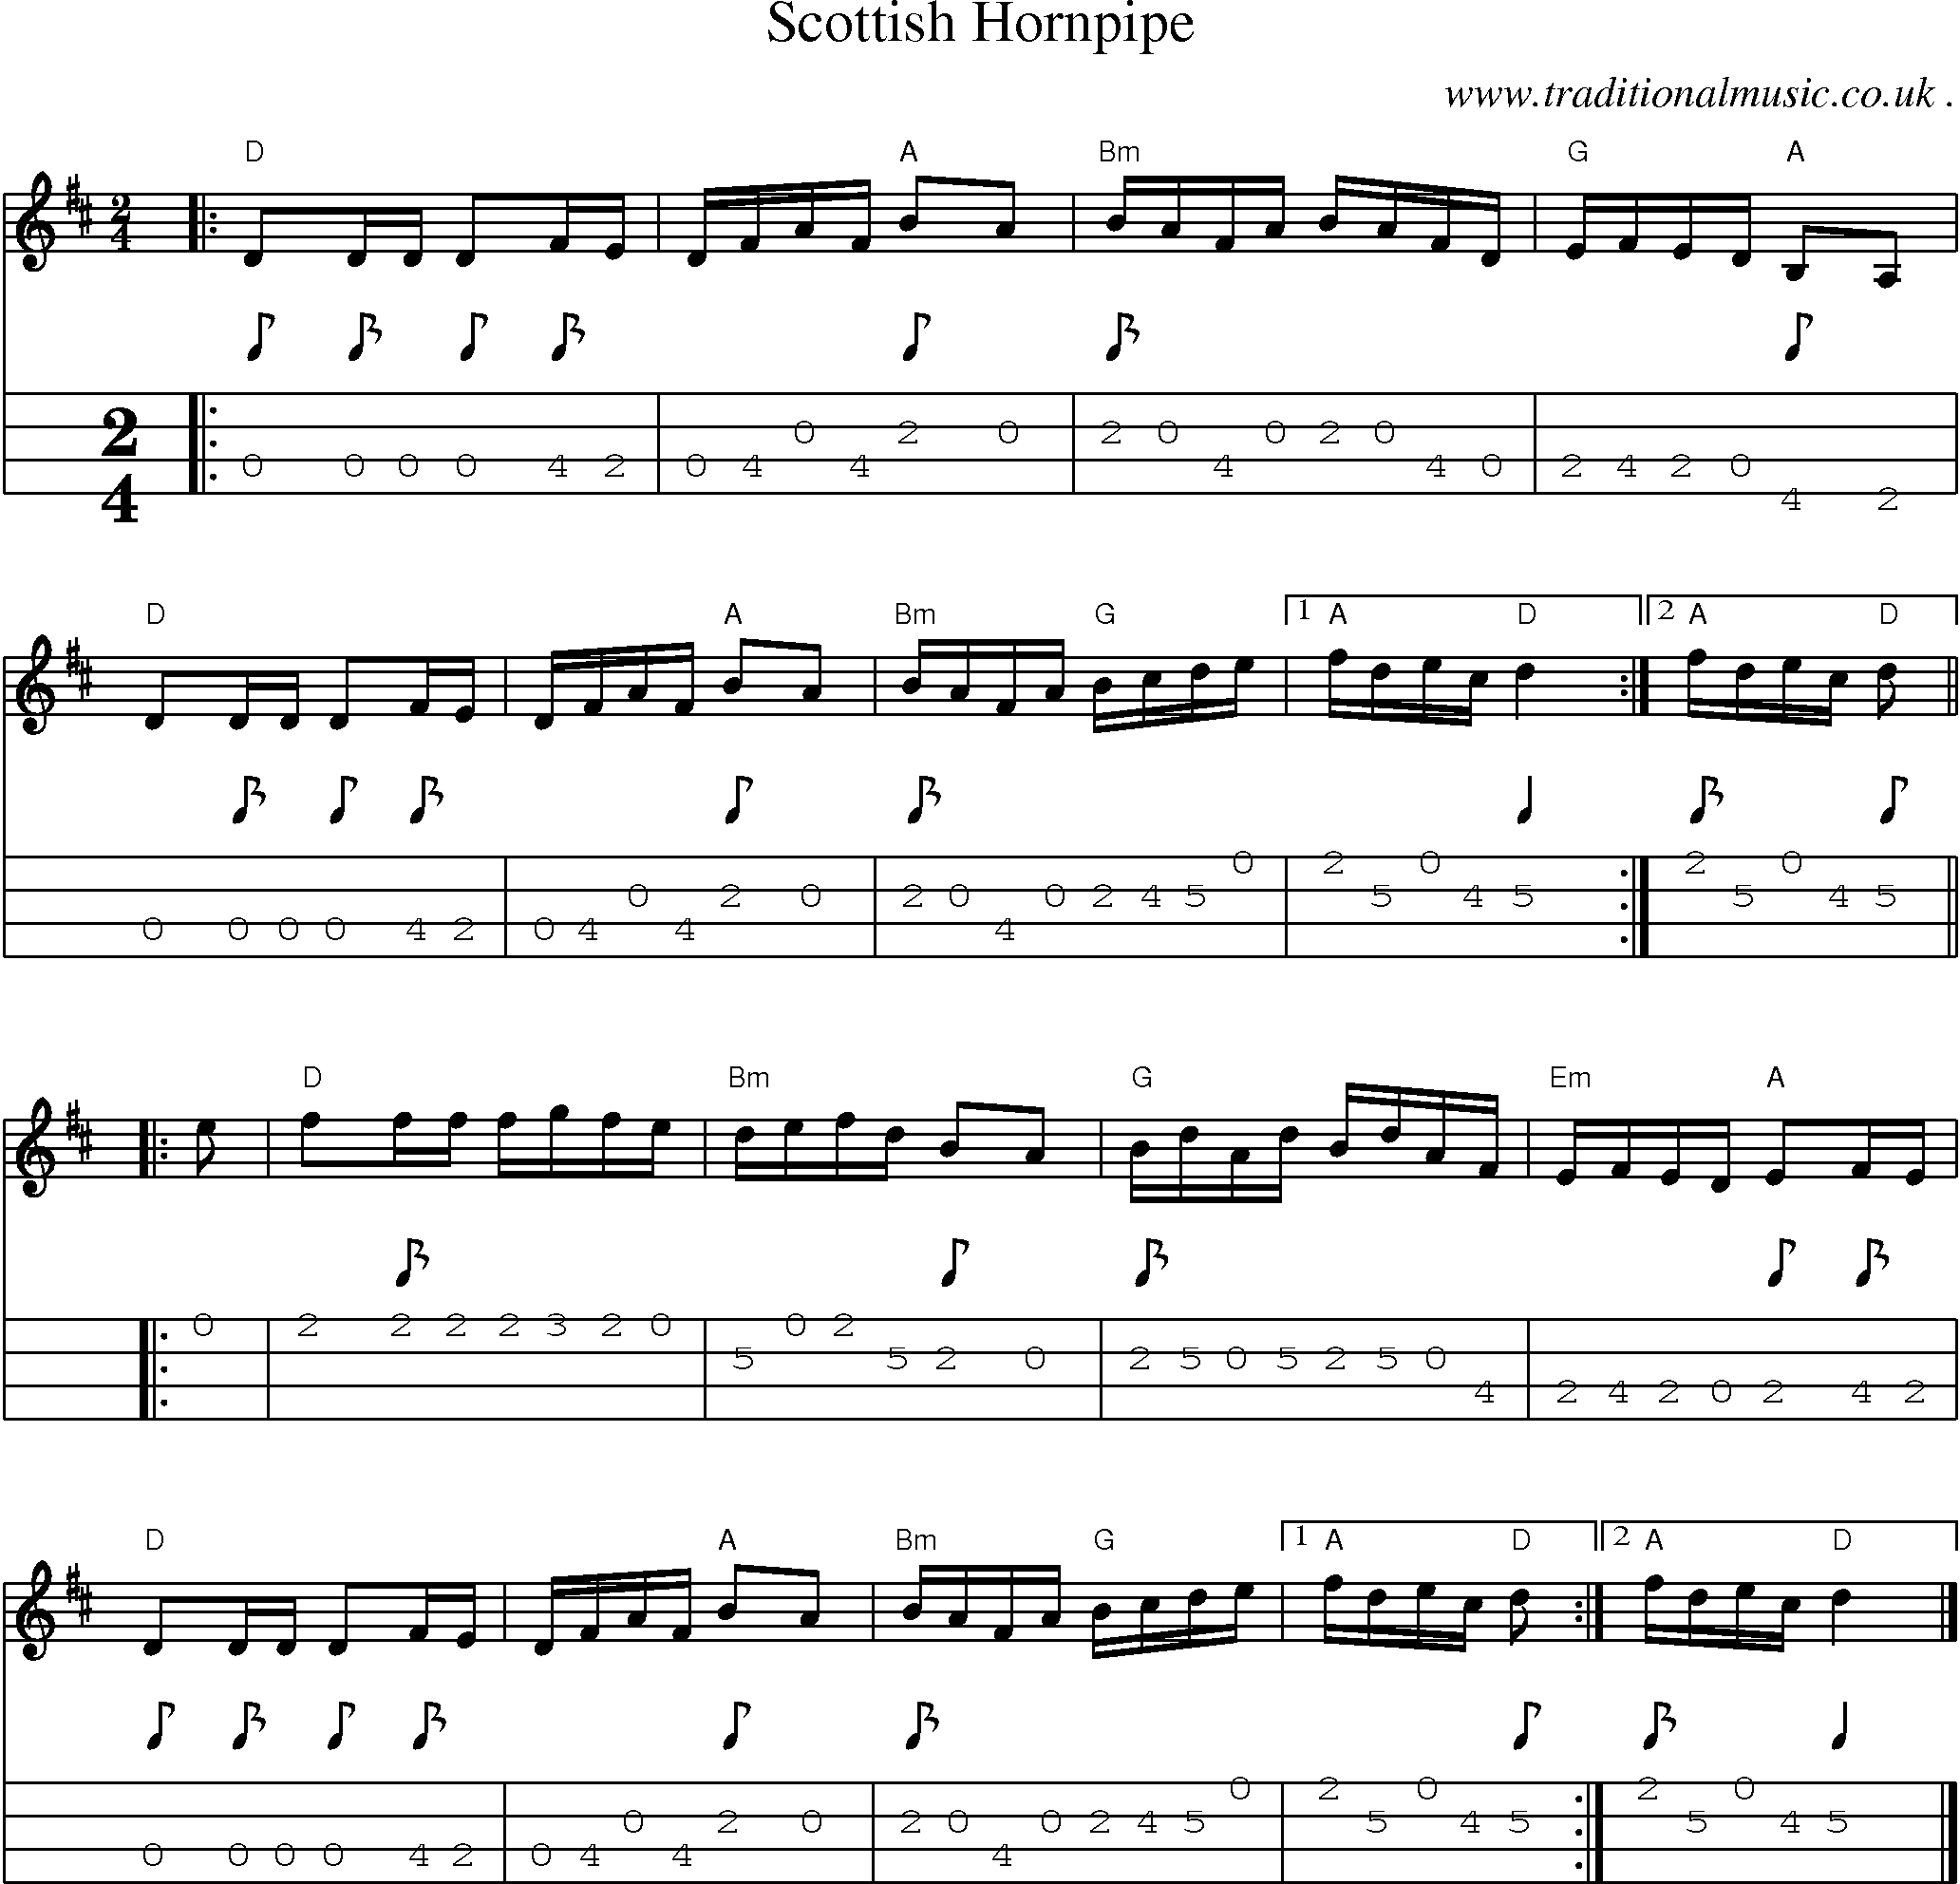 Music Score and Guitar Tabs for Scottish Hornpipe